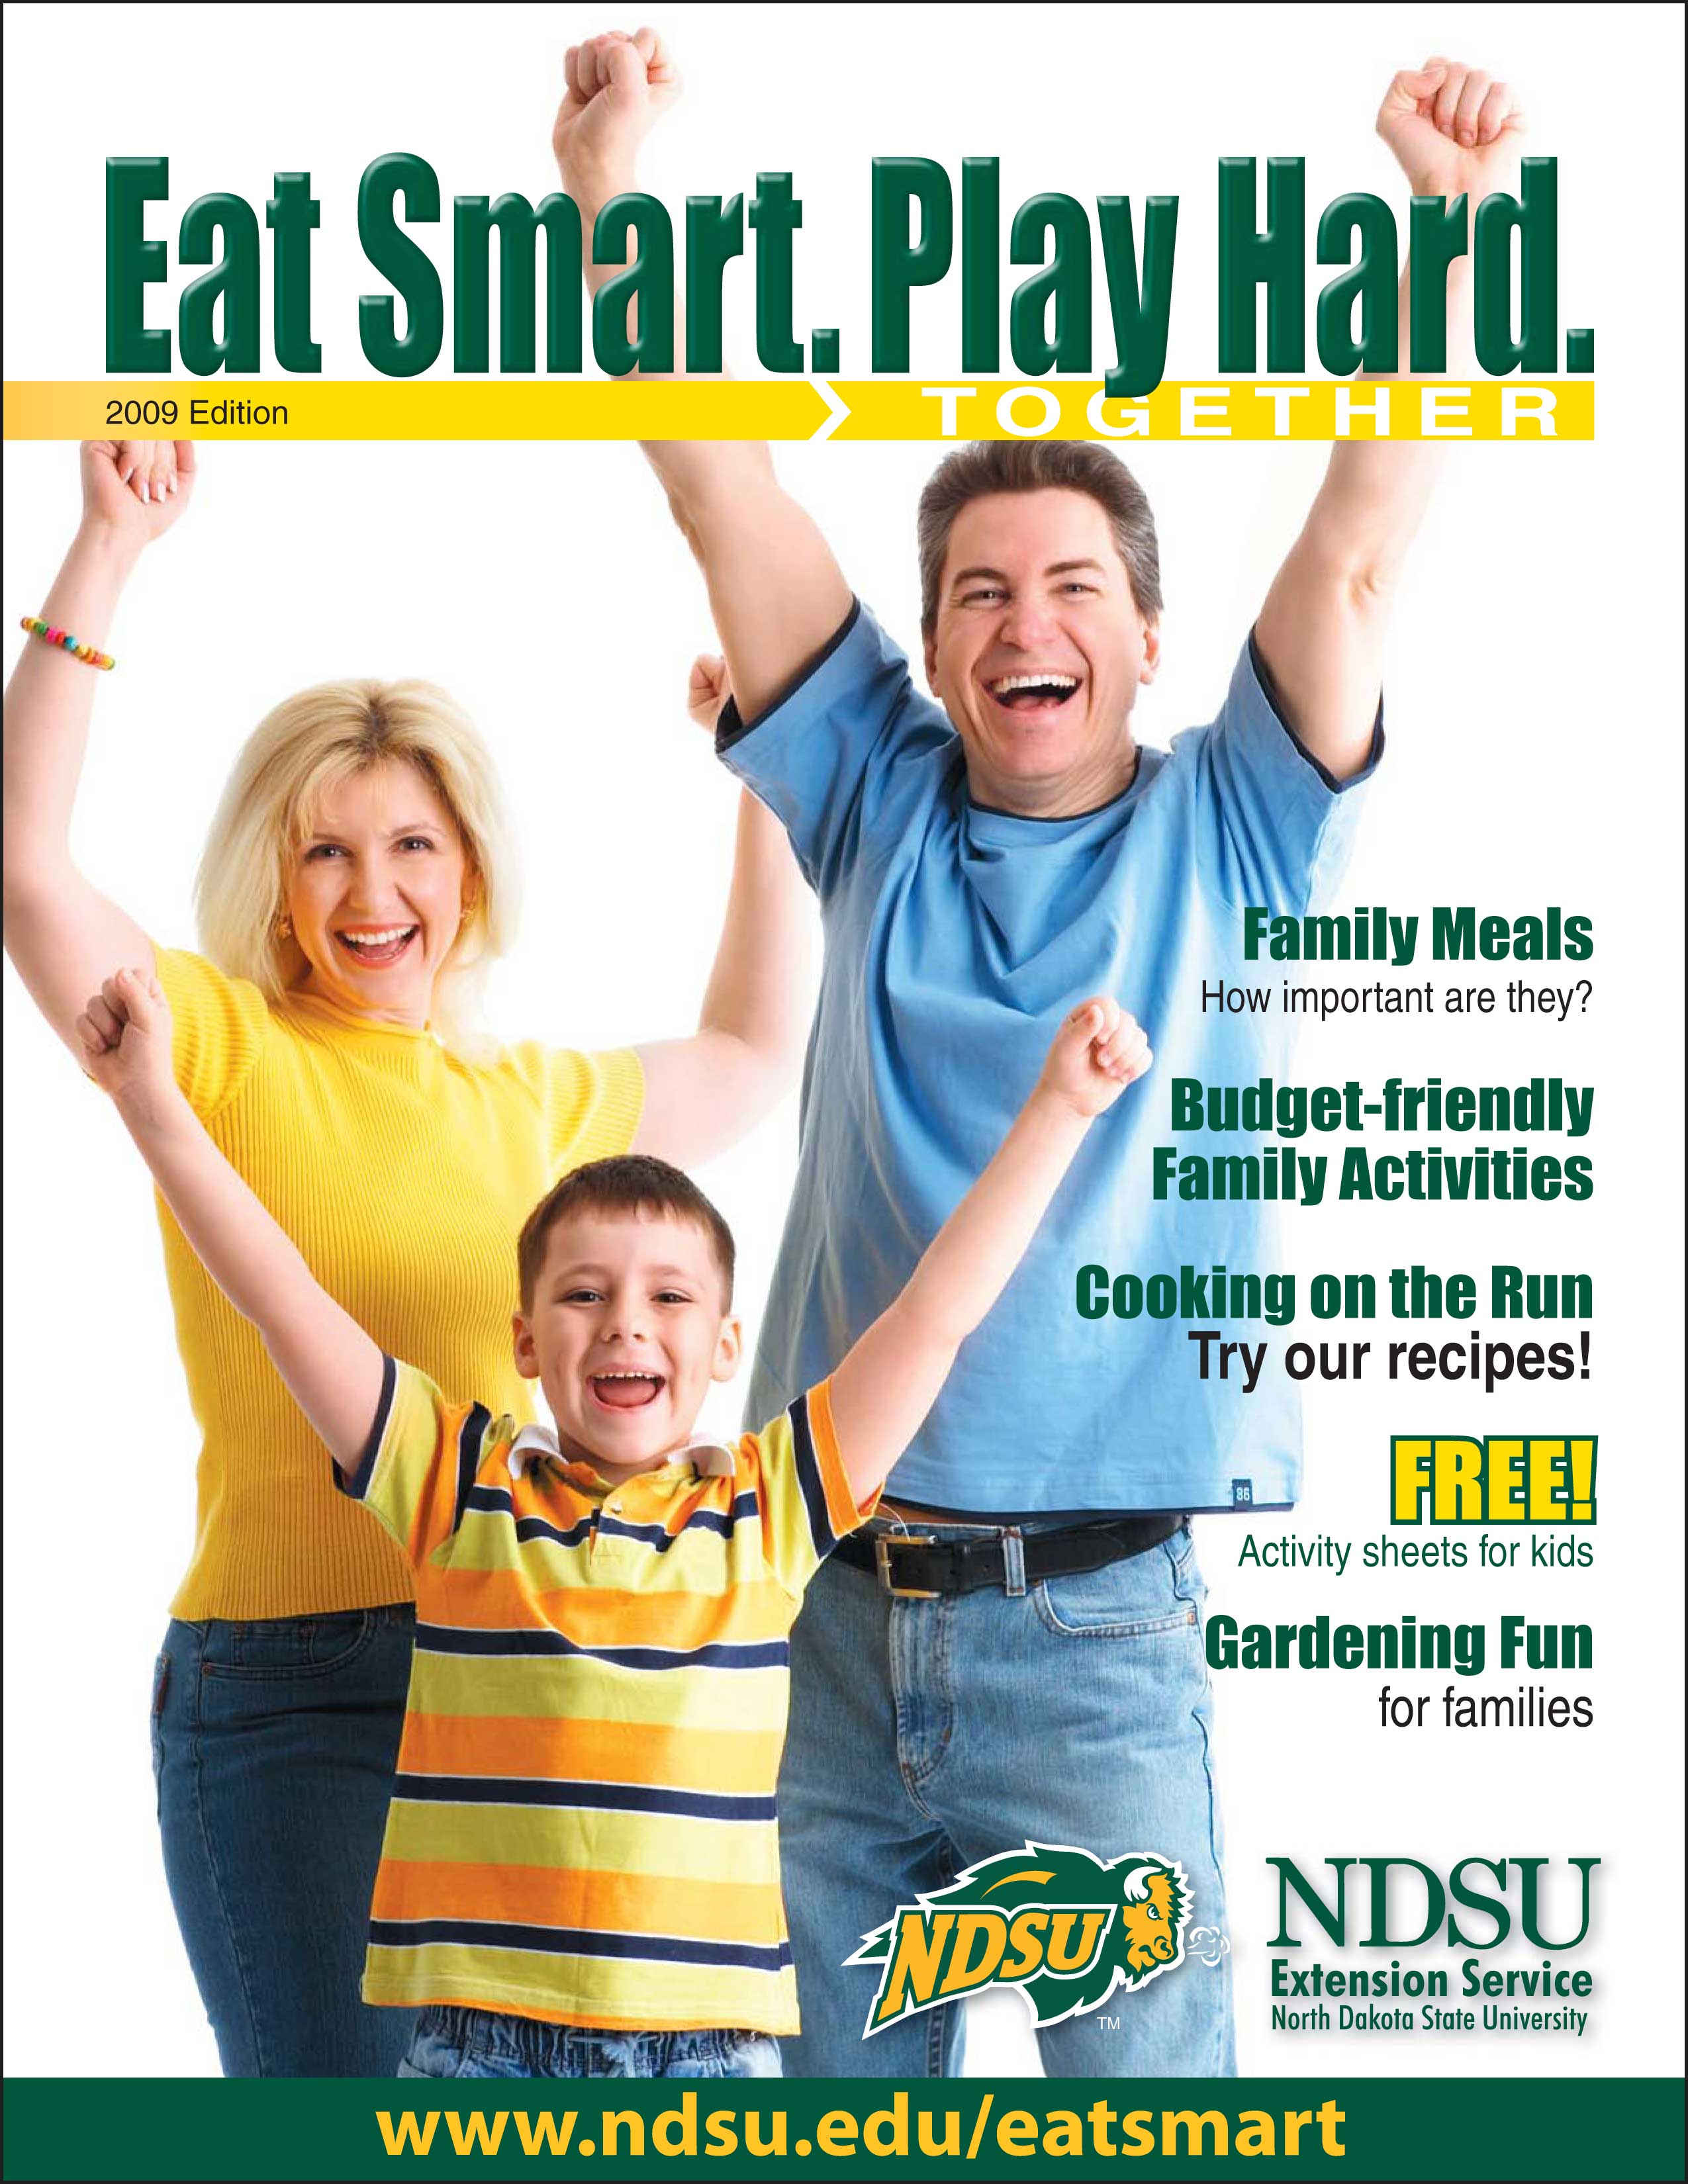 The NDSU Extension Service and Bison Athletics have teamed up to launch a magazine to help families live more healthful, active lives.